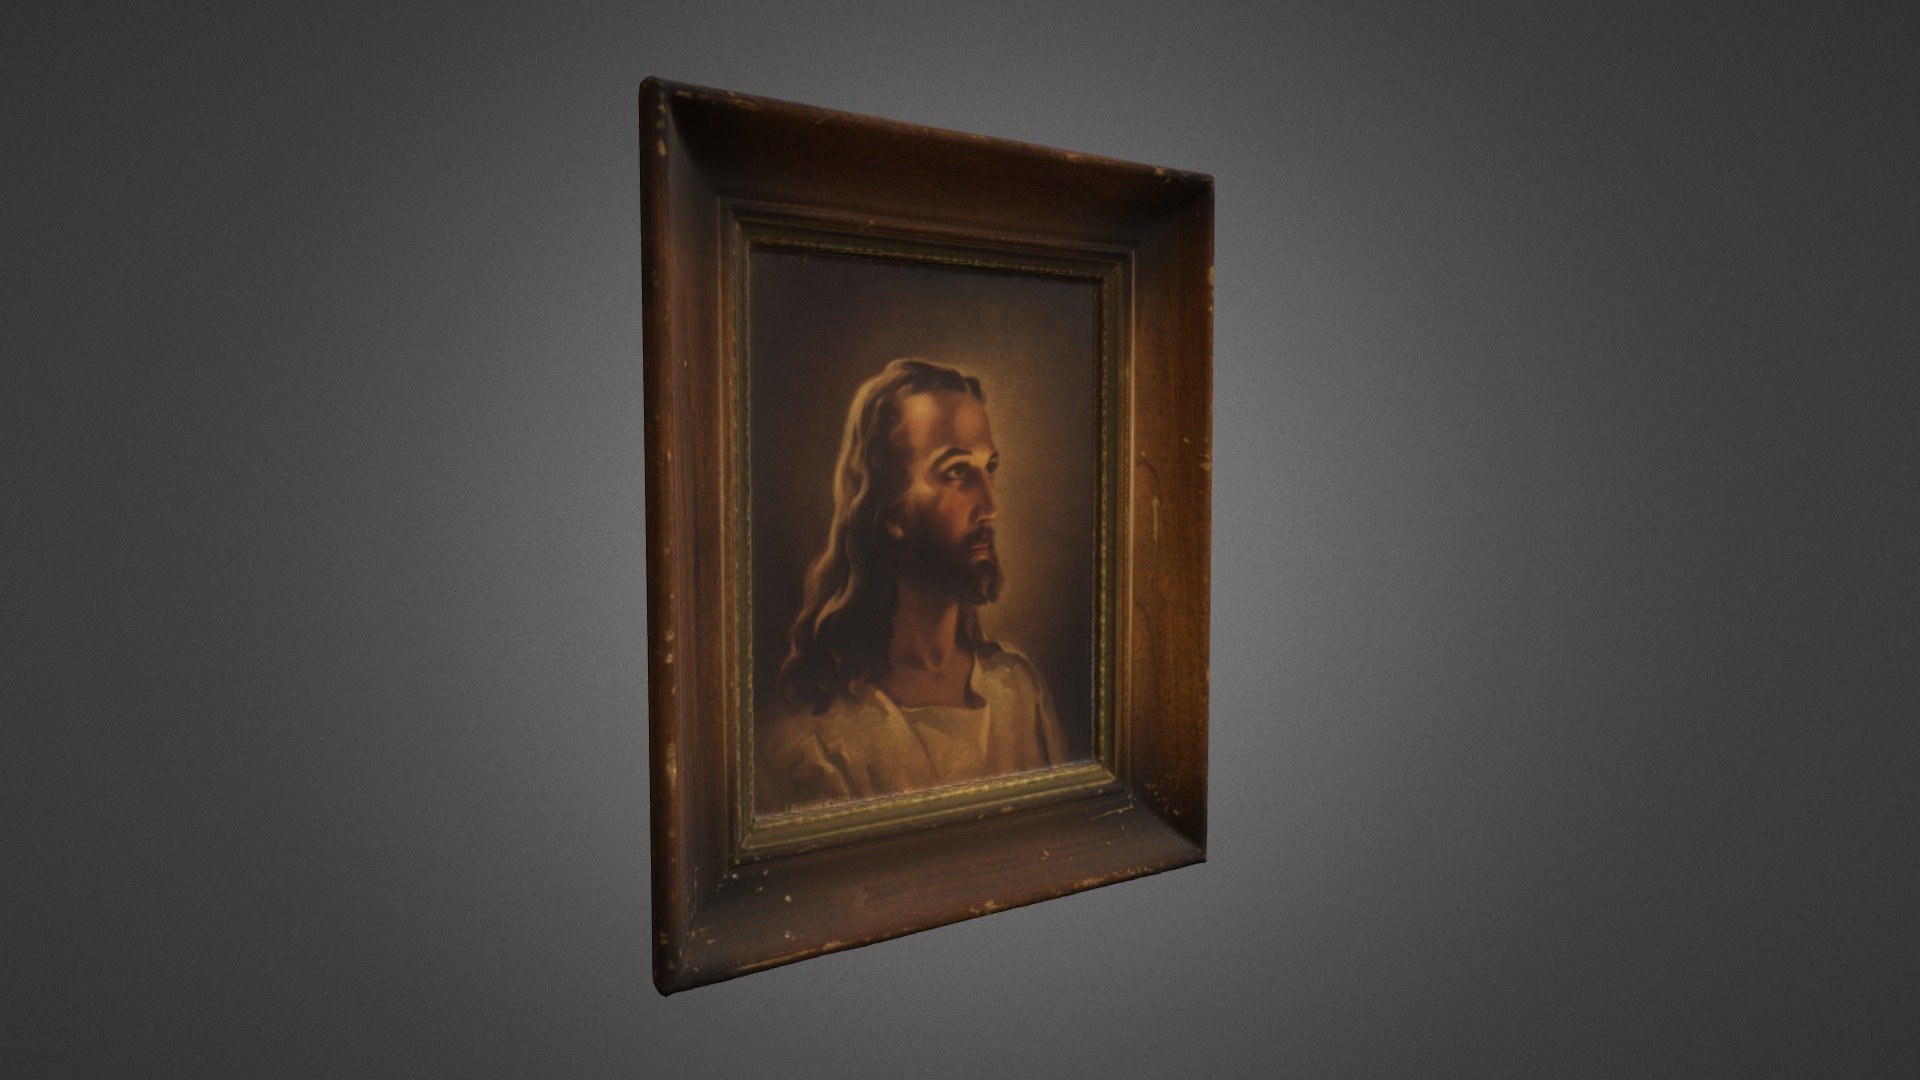 3d Scanned painting of Jesus Christ. Pretty old and has some nice age to it!

Comes with

3D




.obj

.fbx

.max (2020)

Textures
* 
* DIFFUSE
* NRM
* GLOSSINESS

If you have any issues please reach out and I will get back to you ASAP

- REO CS - Old painting of Jesus Christ - Buy Royalty Free 3D model by Reo Creative Scanning (@ReoCreativeScanning) 3d model